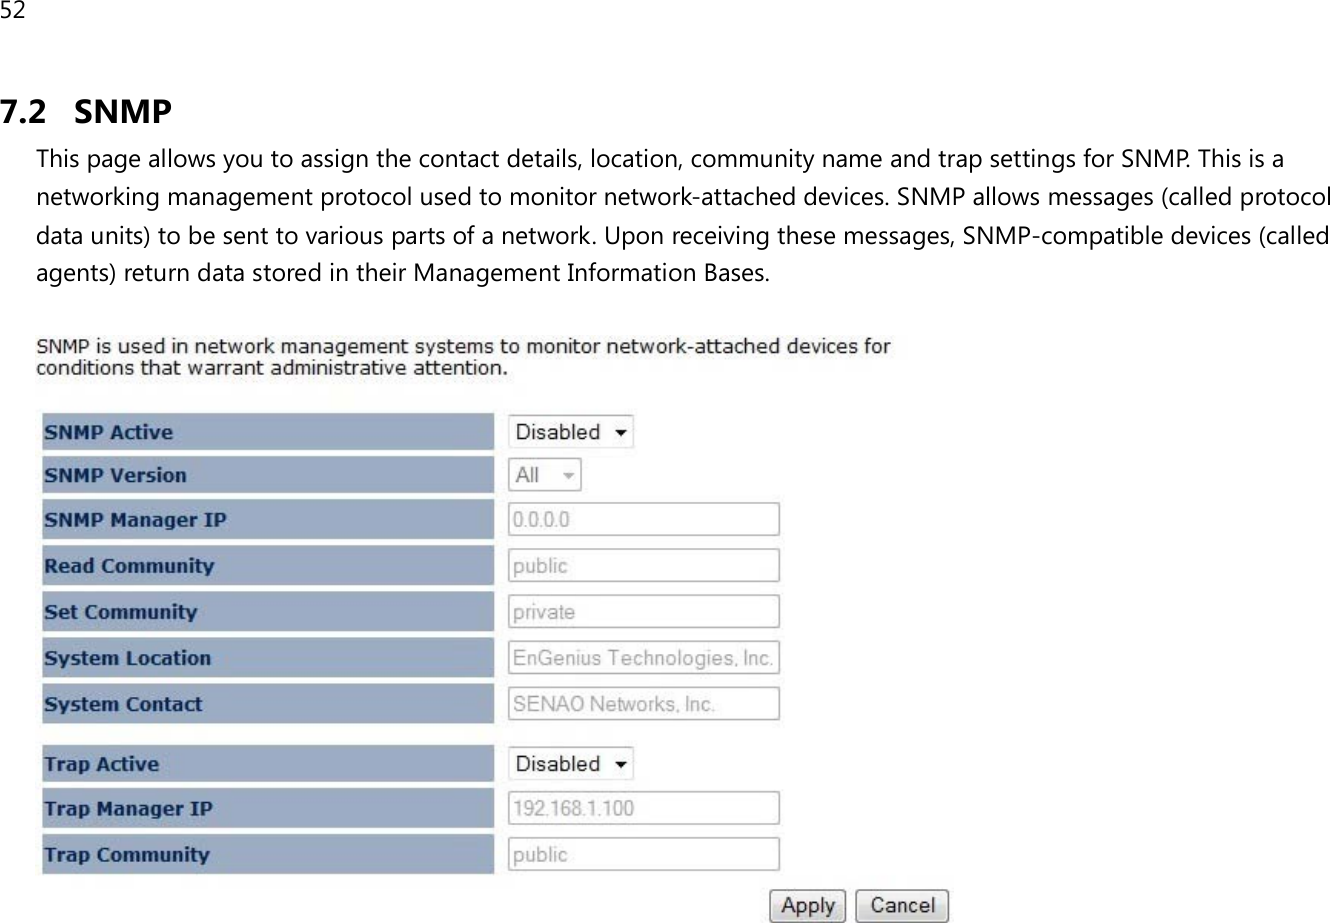 52  7.2 SNMP This page allows you to assign the contact details, location, community name and trap settings for SNMP. This is a networking management protocol used to monitor network-attached devices. SNMP allows messages (called protocol data units) to be sent to various parts of a network. Upon receiving these messages, SNMP-compatible devices (called agents) return data stored in their Management Information Bases.      